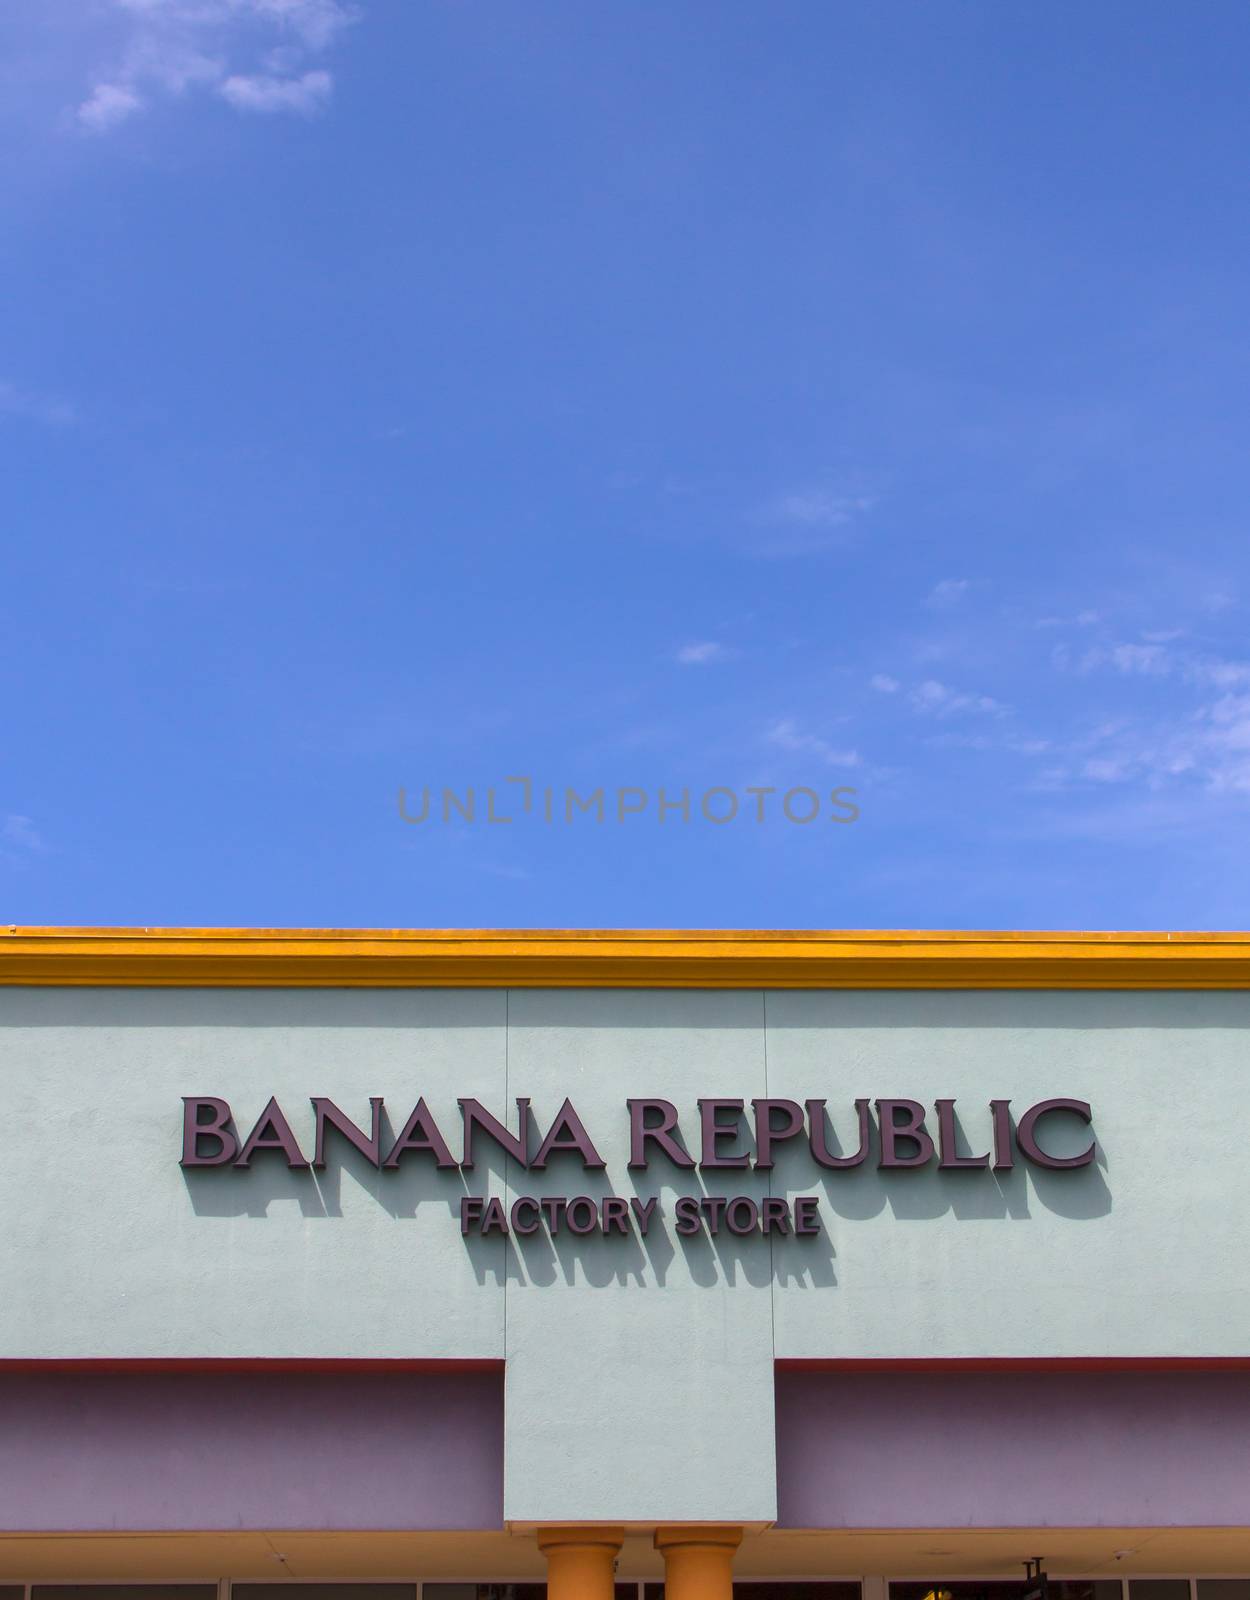 GILROY, CA/USA - JULY 19, 2014: Banana Republic store exterior. Banana Republic is a clothing and accessories retailer owned by American multinational corporation Gap Inc.